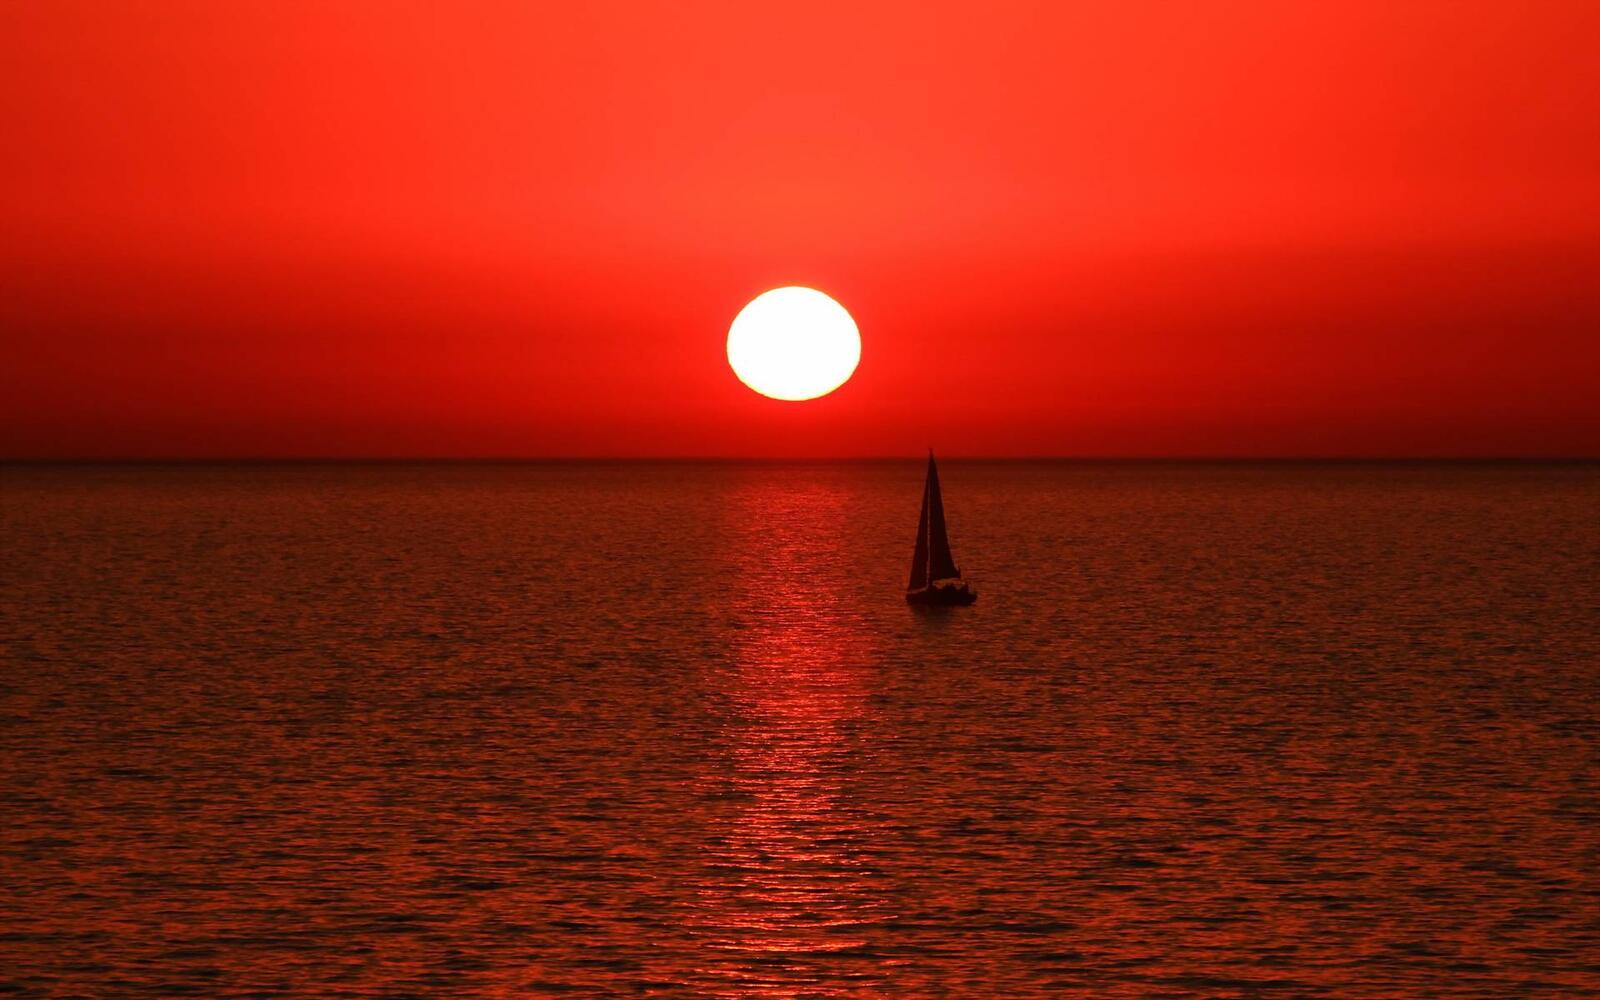 Wallpapers sailboat at sunset red sky ripples on the desktop